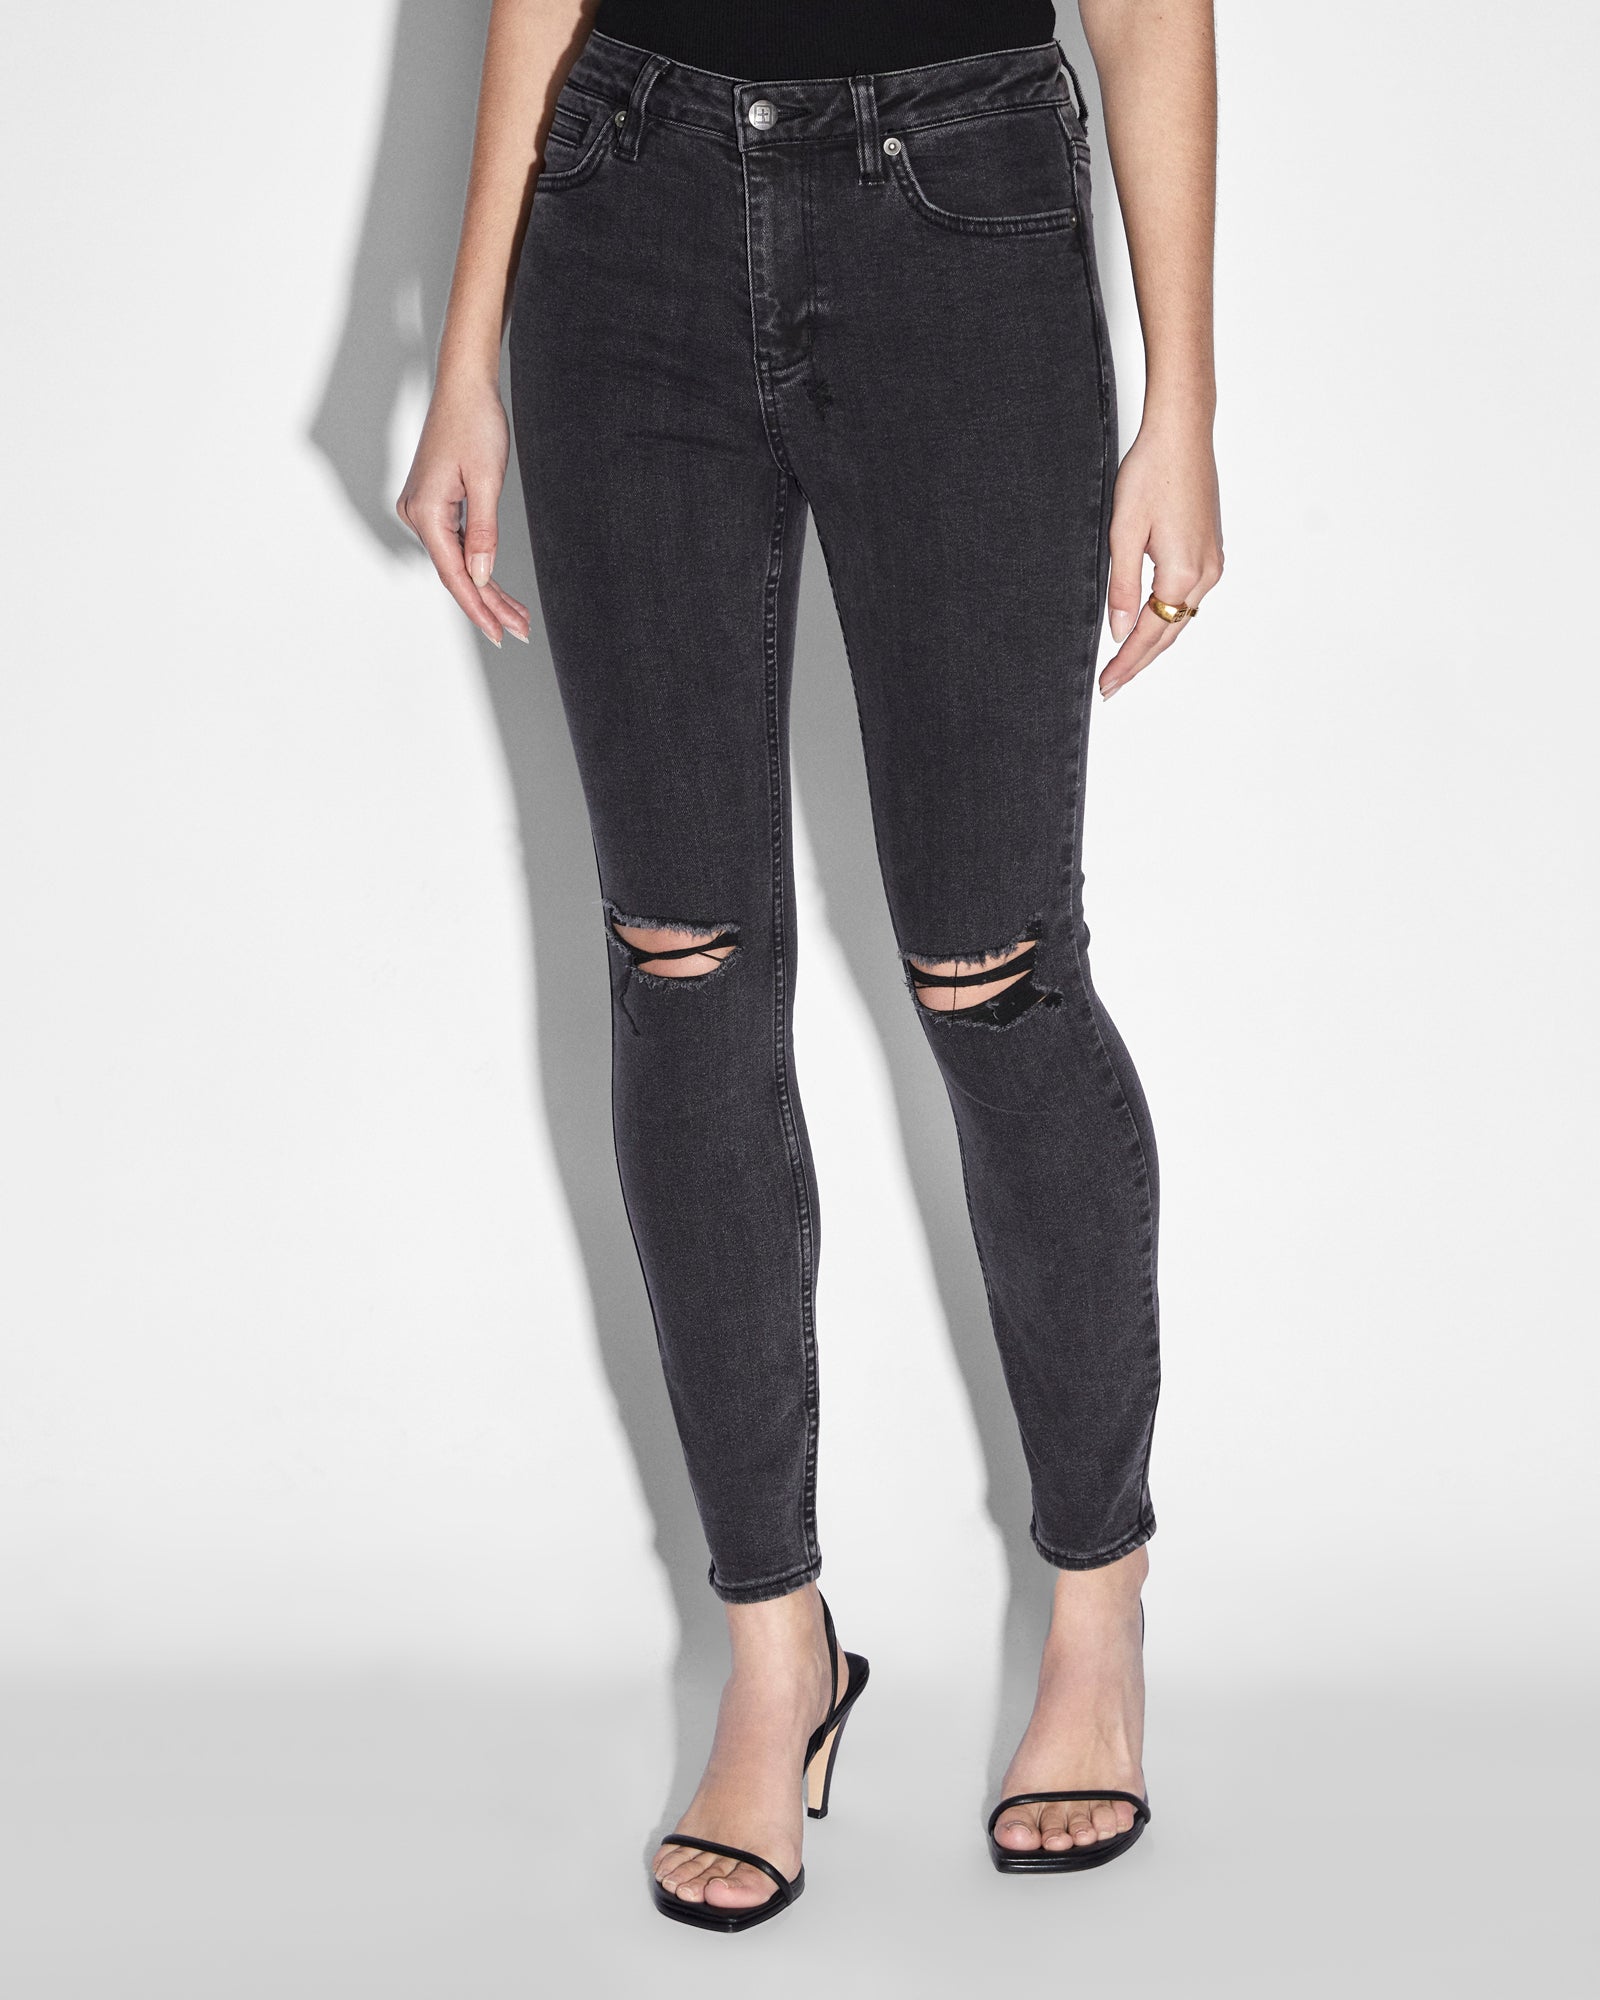 Black Core Ripped Slim Fit Jeans, Jeans